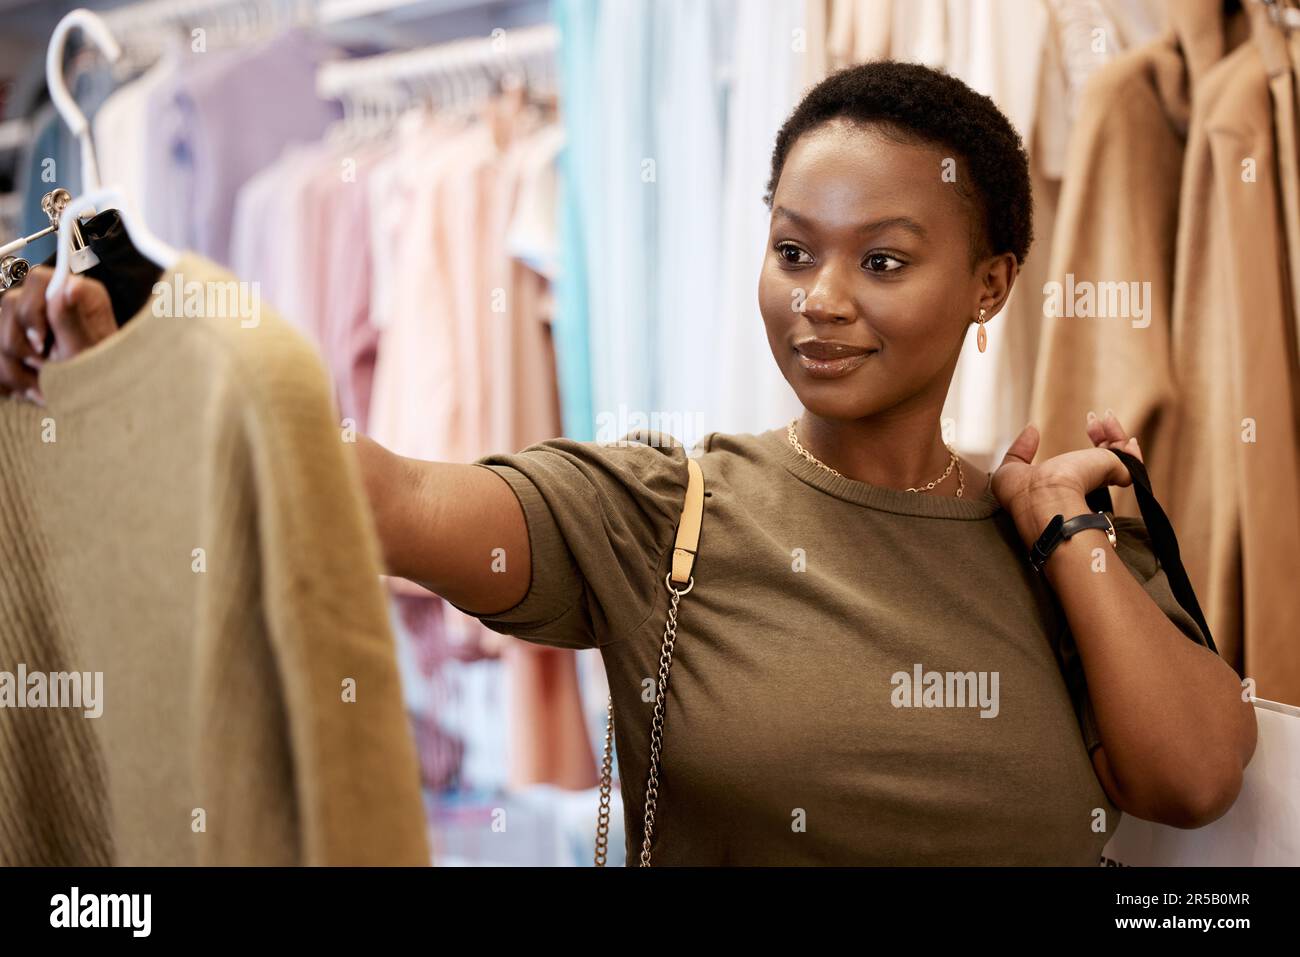 Fashion, shopping and smile with black woman in boutique store for luxury, sale and retail. Choice, product and consumerism with female customer Stock Photo